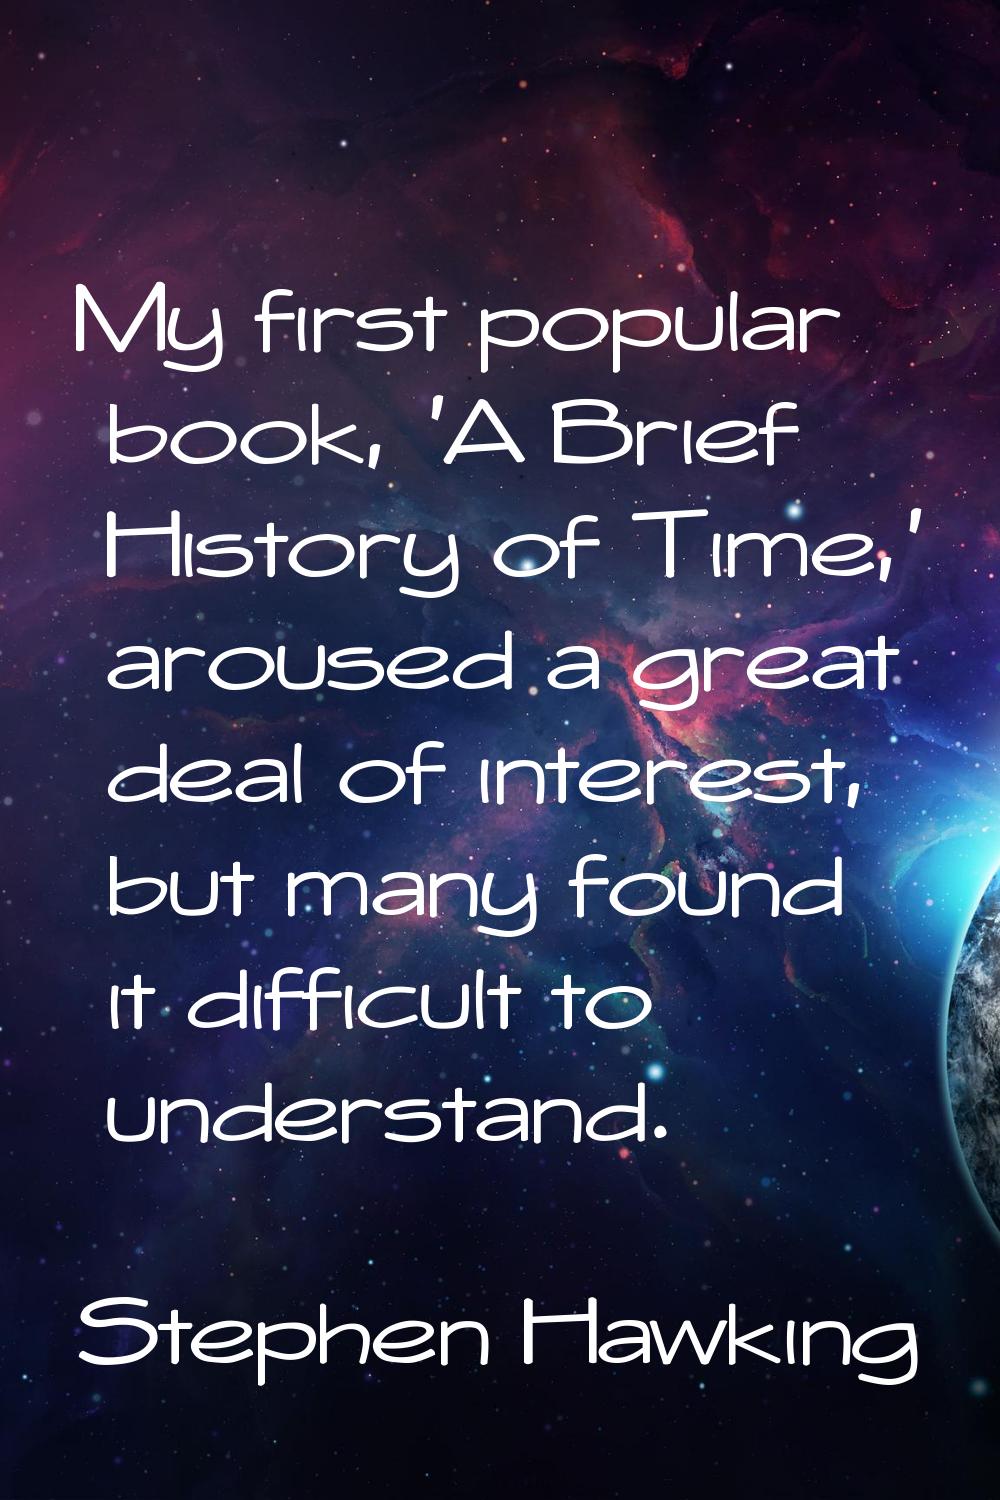 My first popular book, 'A Brief History of Time,' aroused a great deal of interest, but many found 